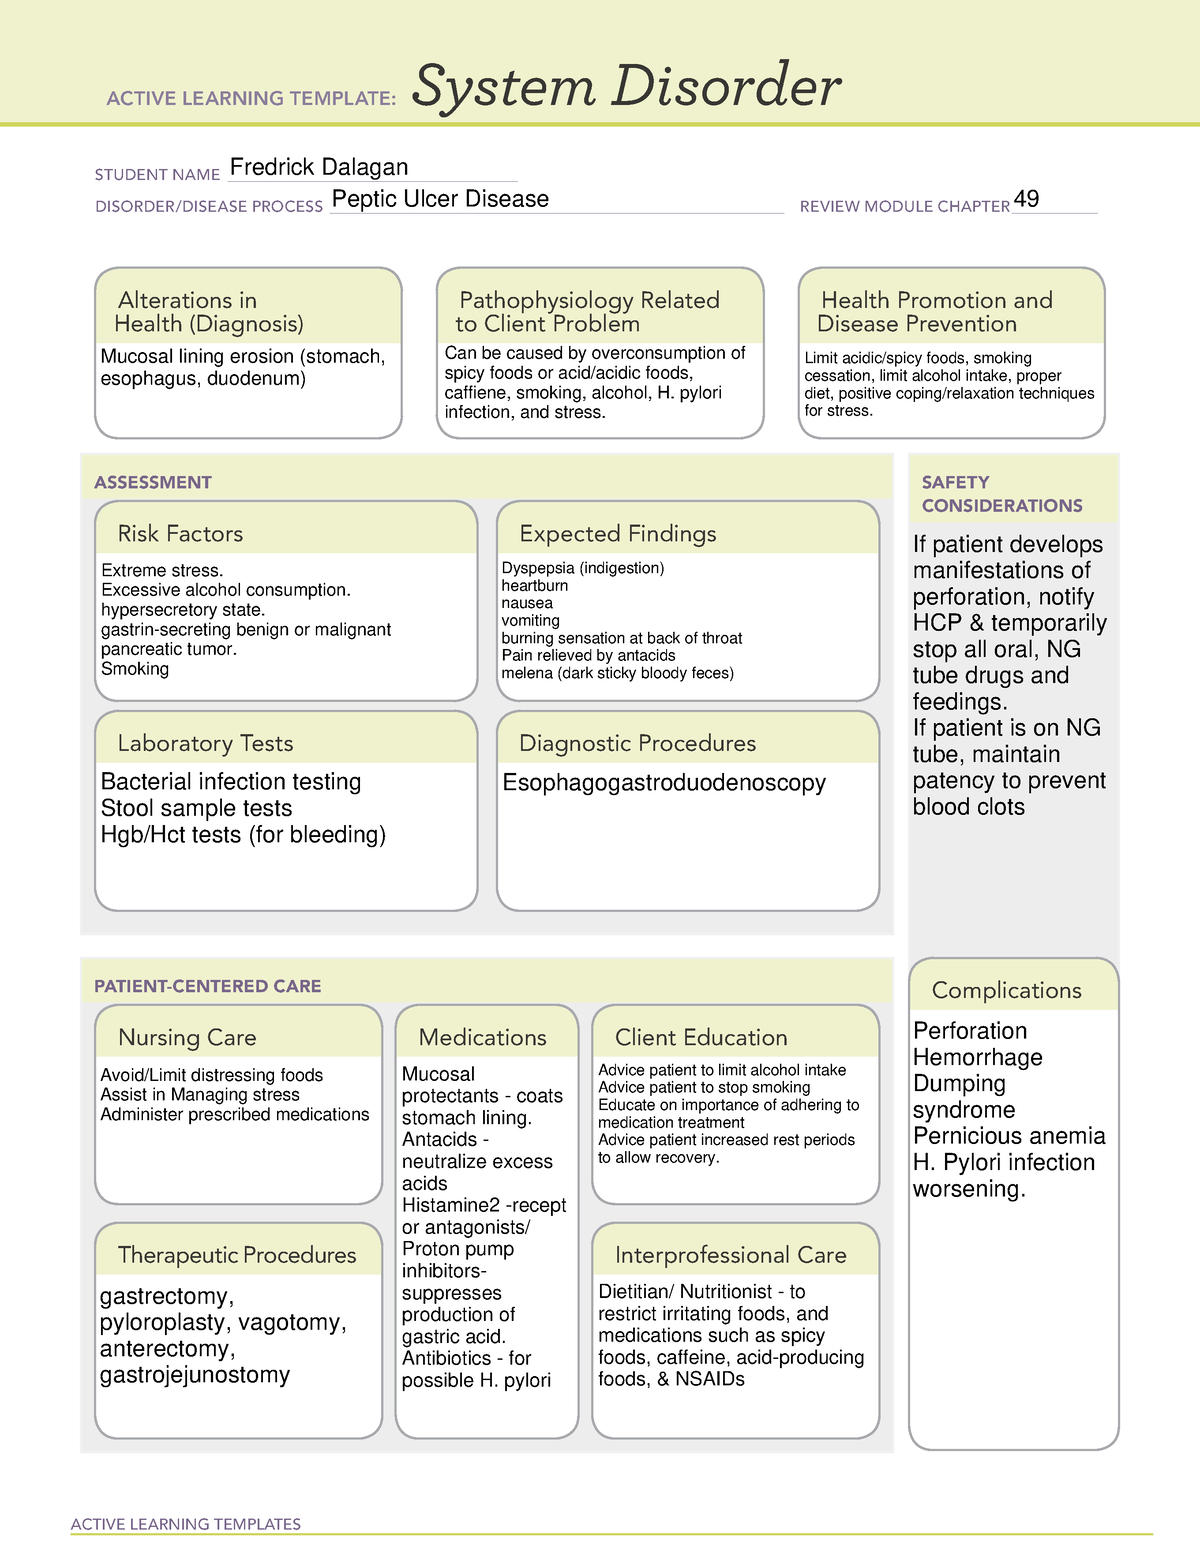 Peptic Ulcer Disease System Disorder Template - ACTIVE LEARNING ...